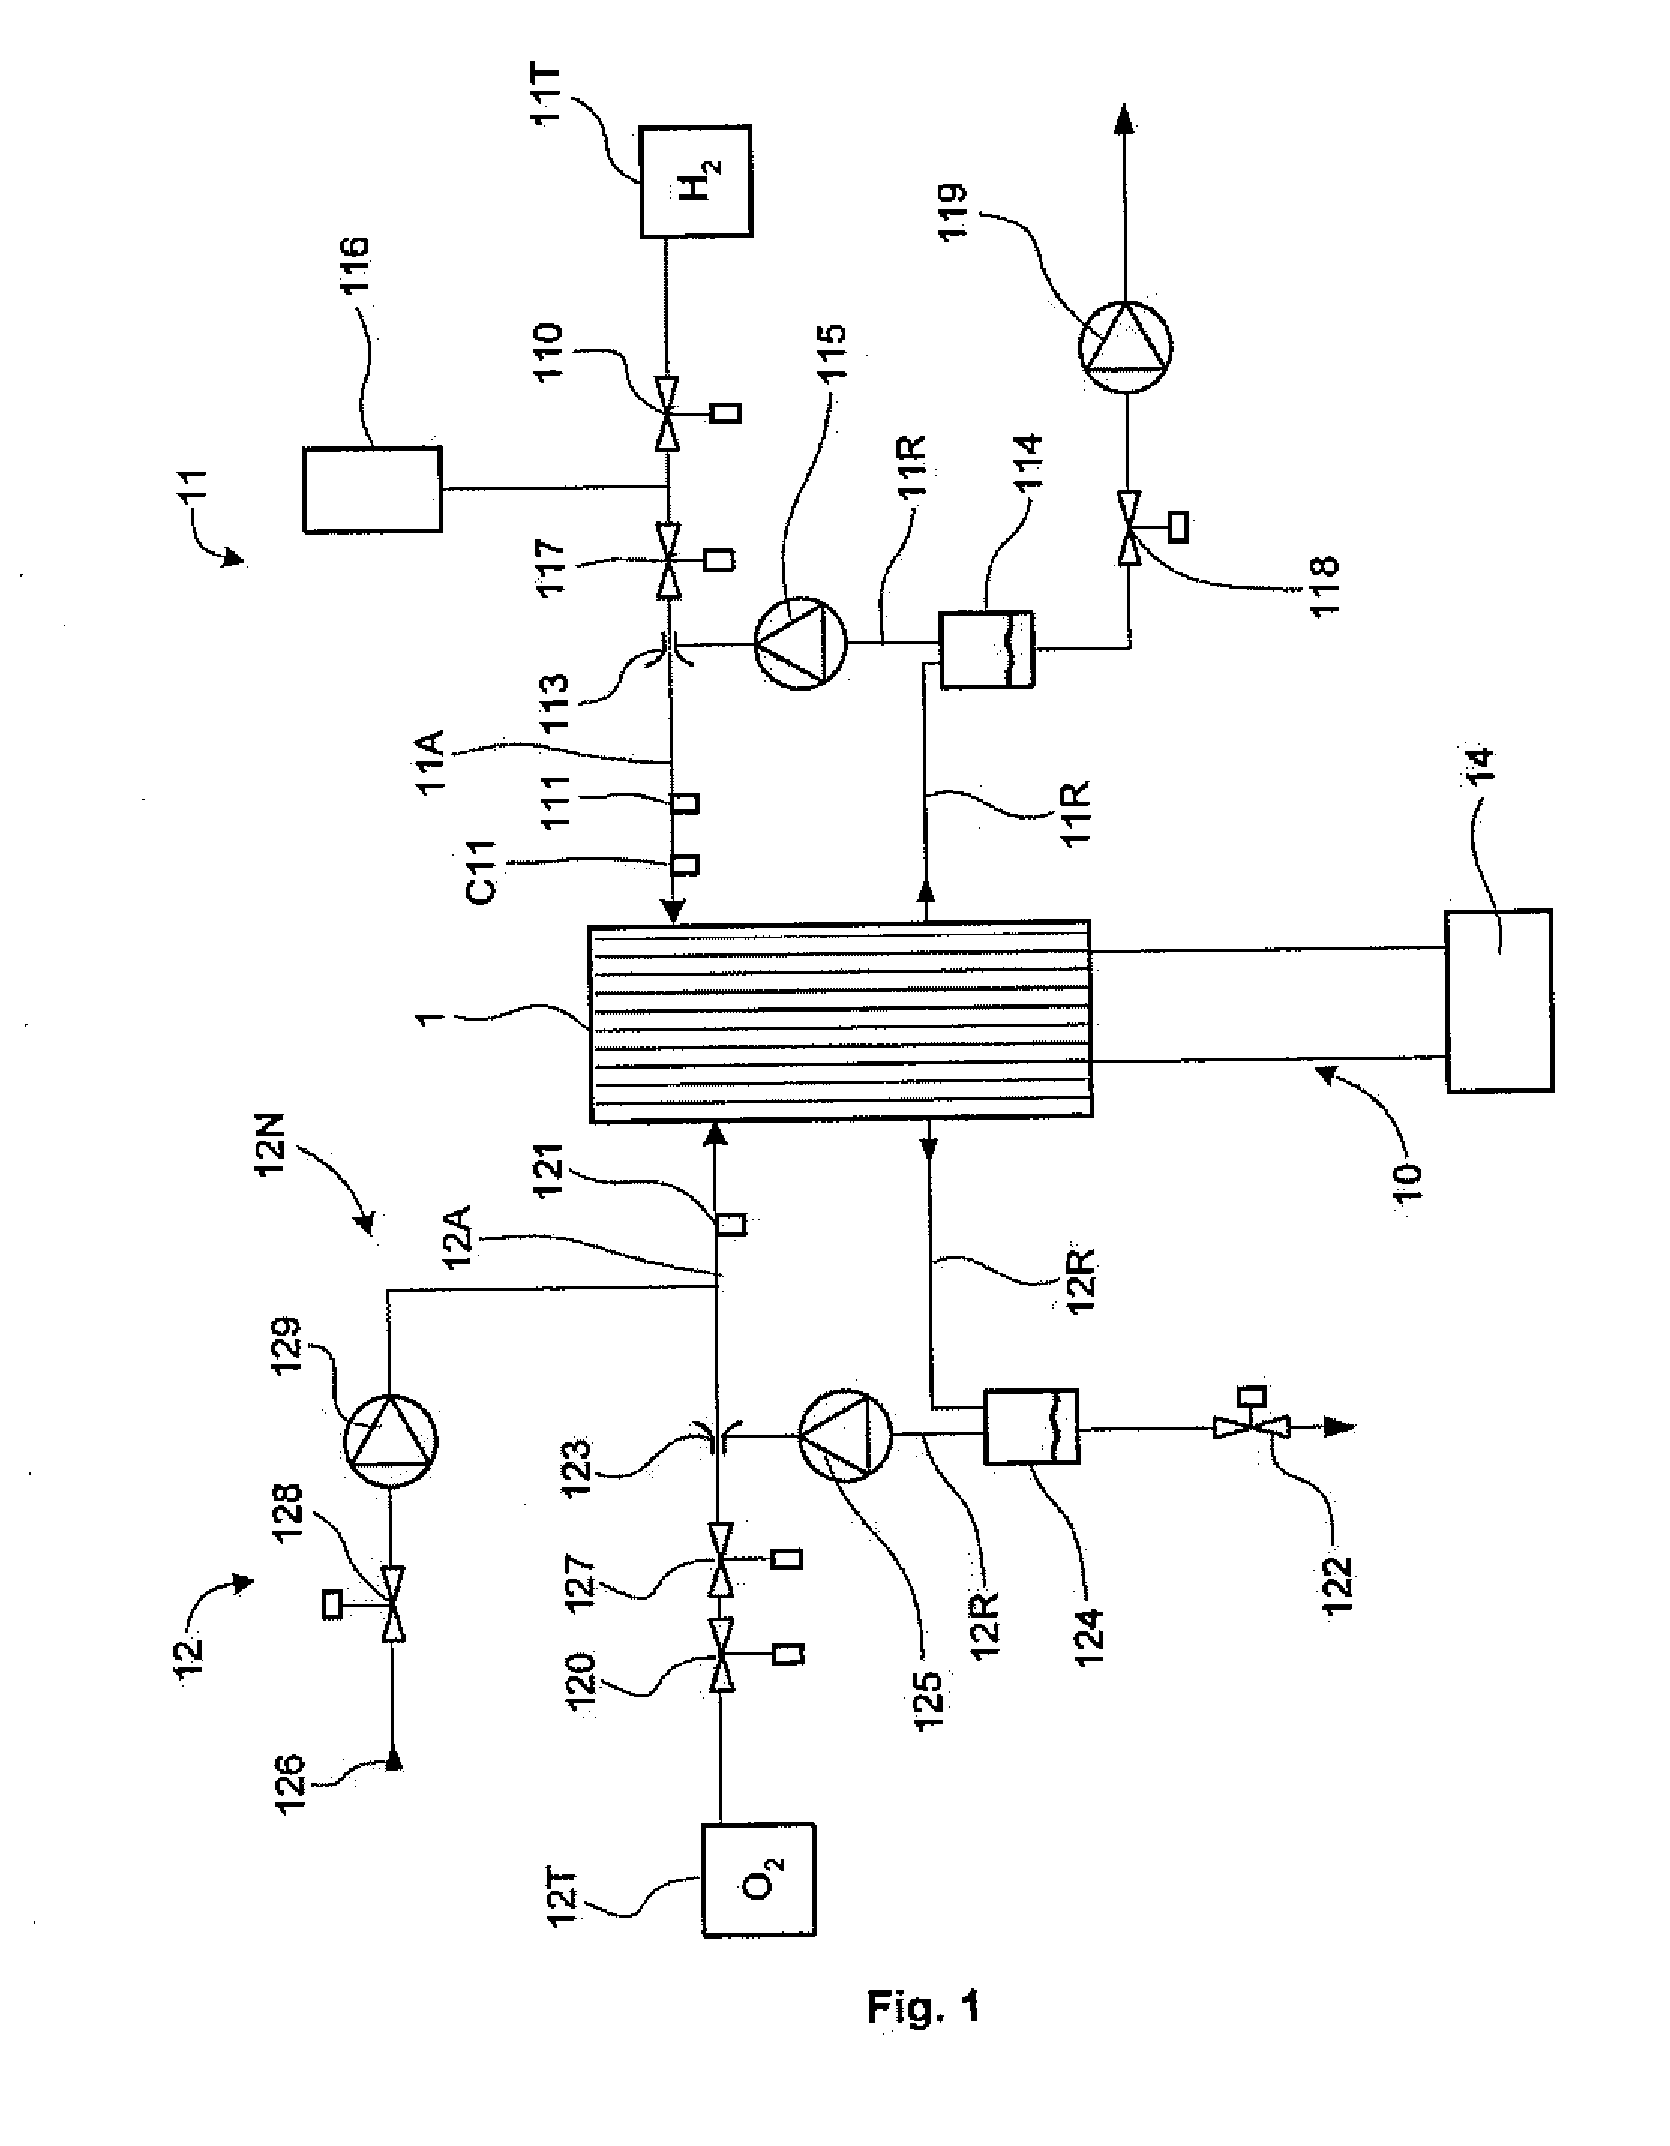 Method for Detecting the Permeability State of the Ion Exchanger Polymer Membrane of a Fuel Cell